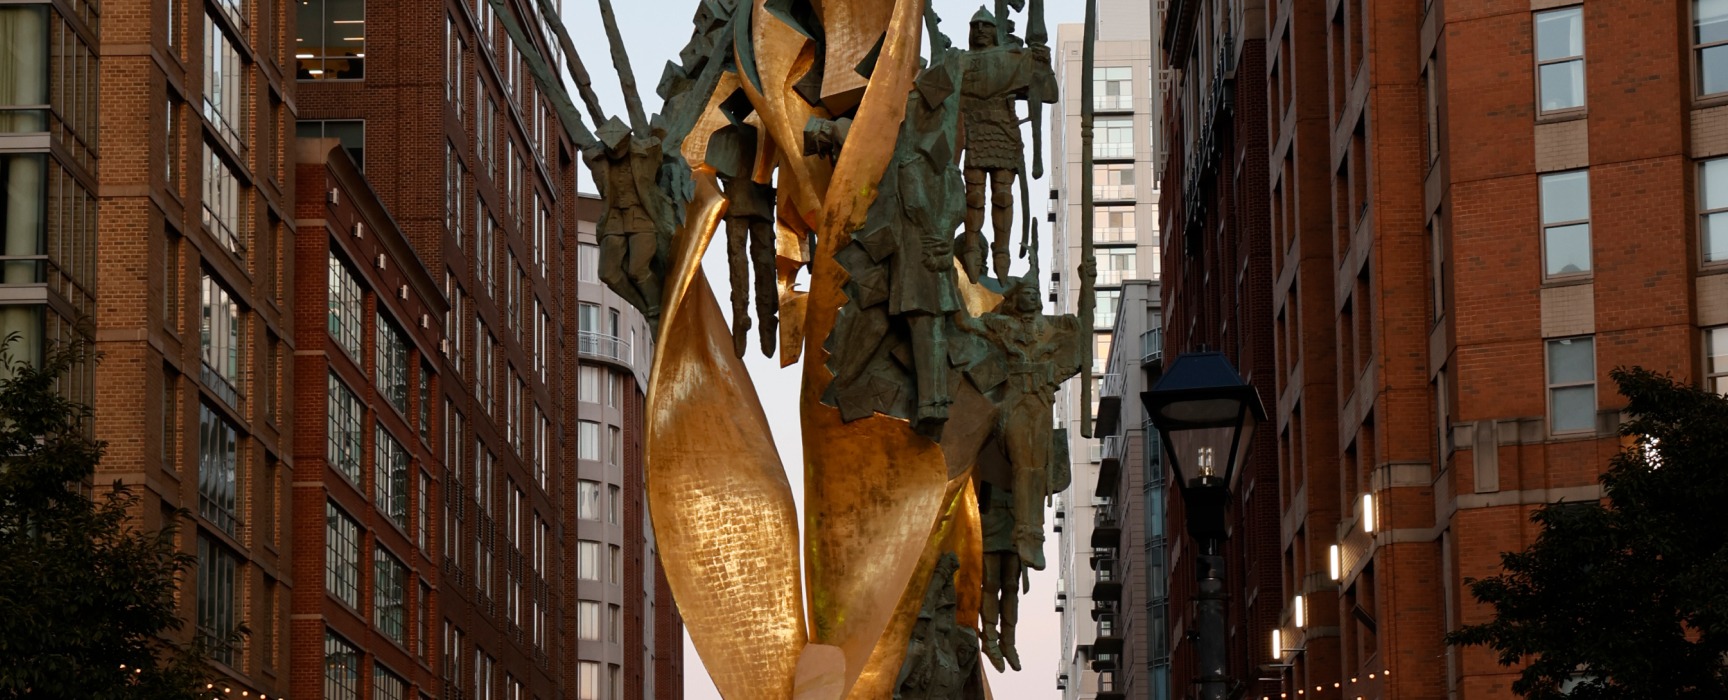 Gold statue in the center of Harbor East flanked by tall city buildings